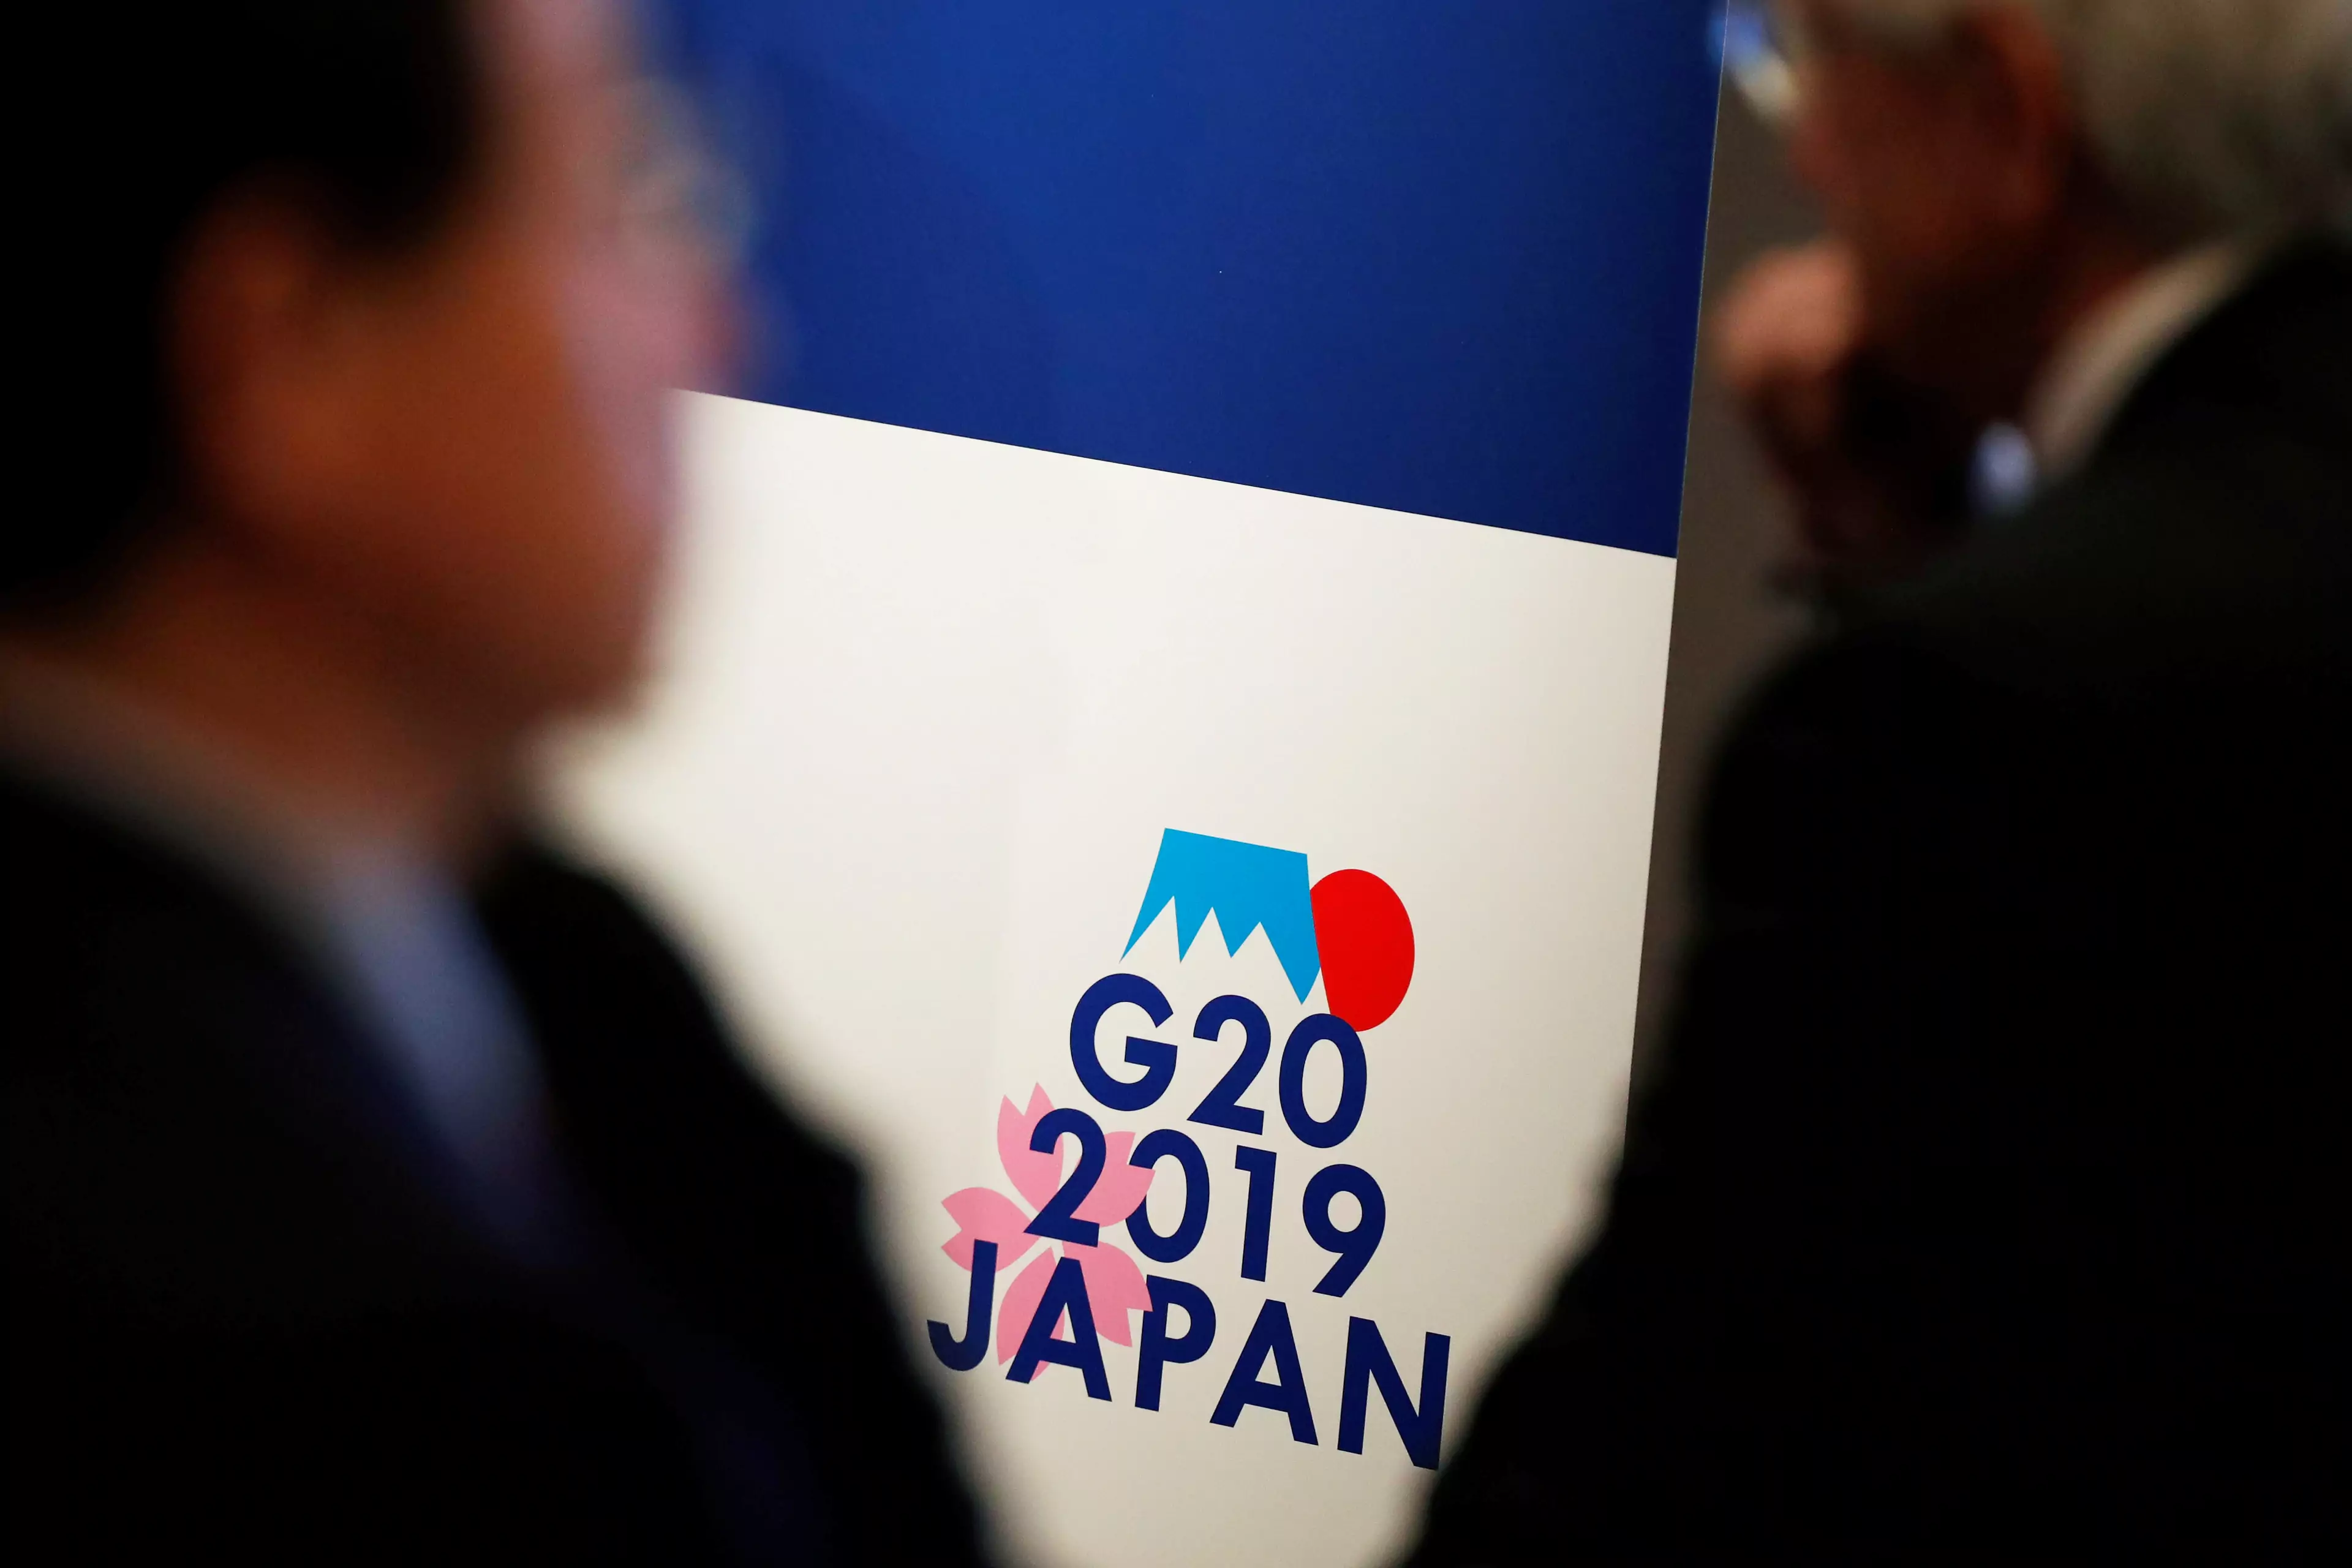 The 2019 G20 logo is displayed at the G20 Finance and Central Bank Deputies Meeting in Tokyo.